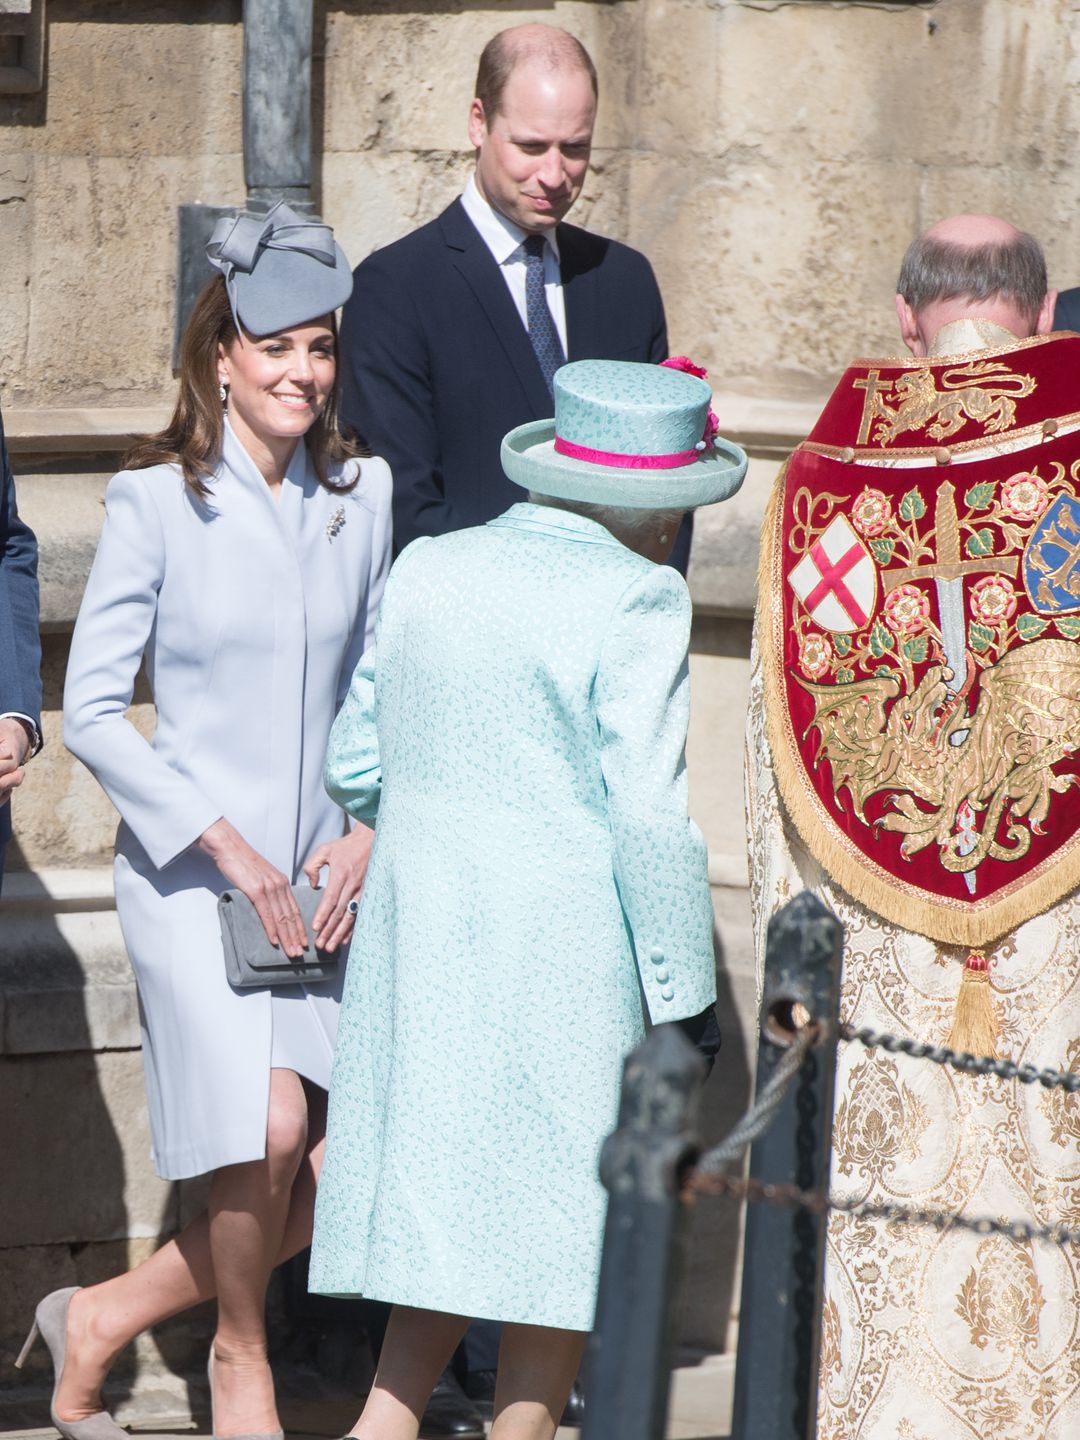 Kate Middleton curtseying to the late Queen